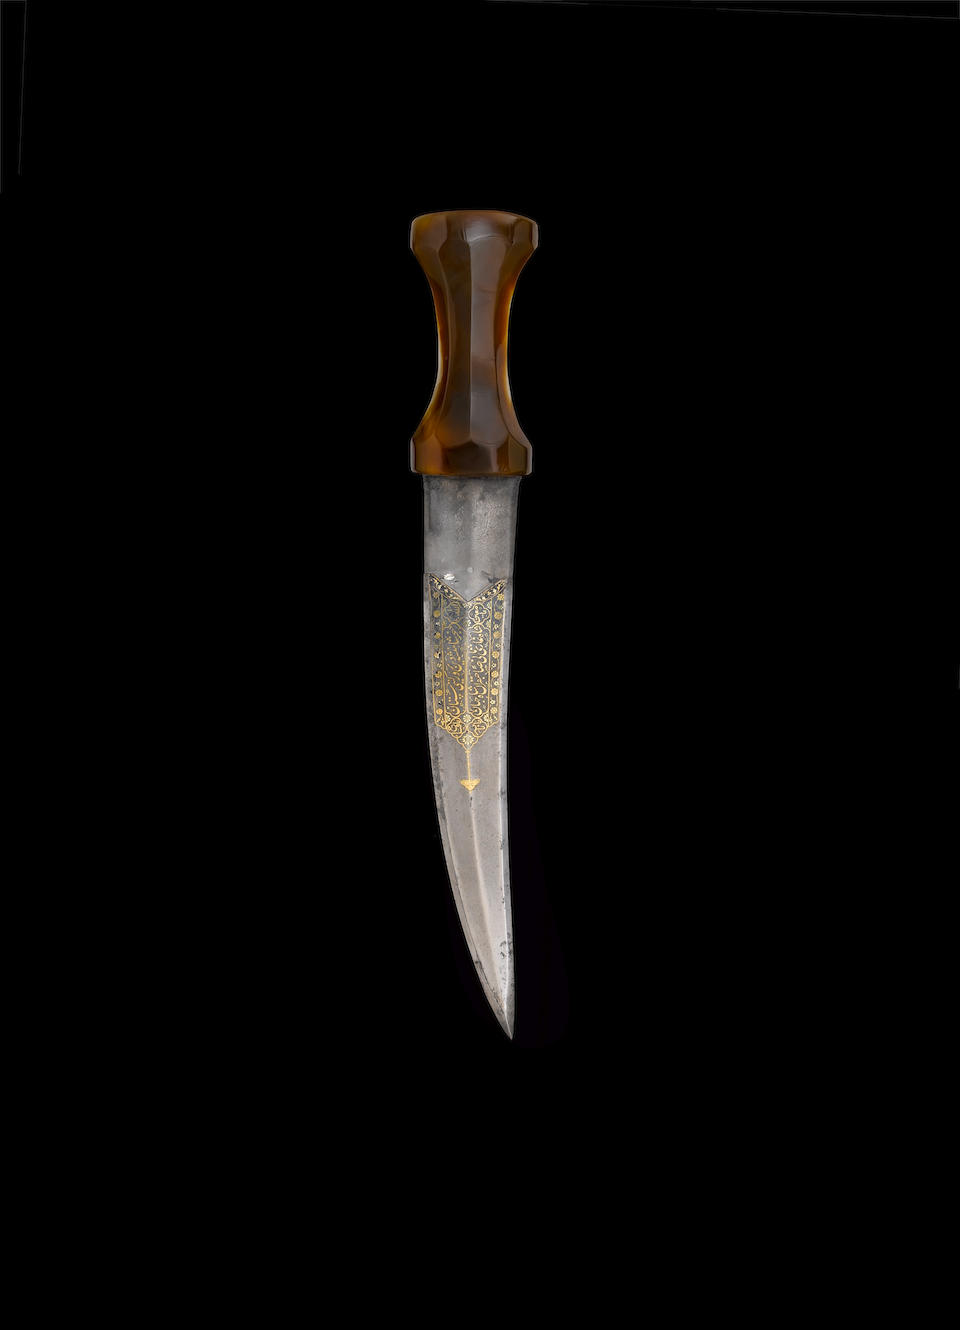 Shah Jahan Dagger - #2 most expensive pocket knife in the world